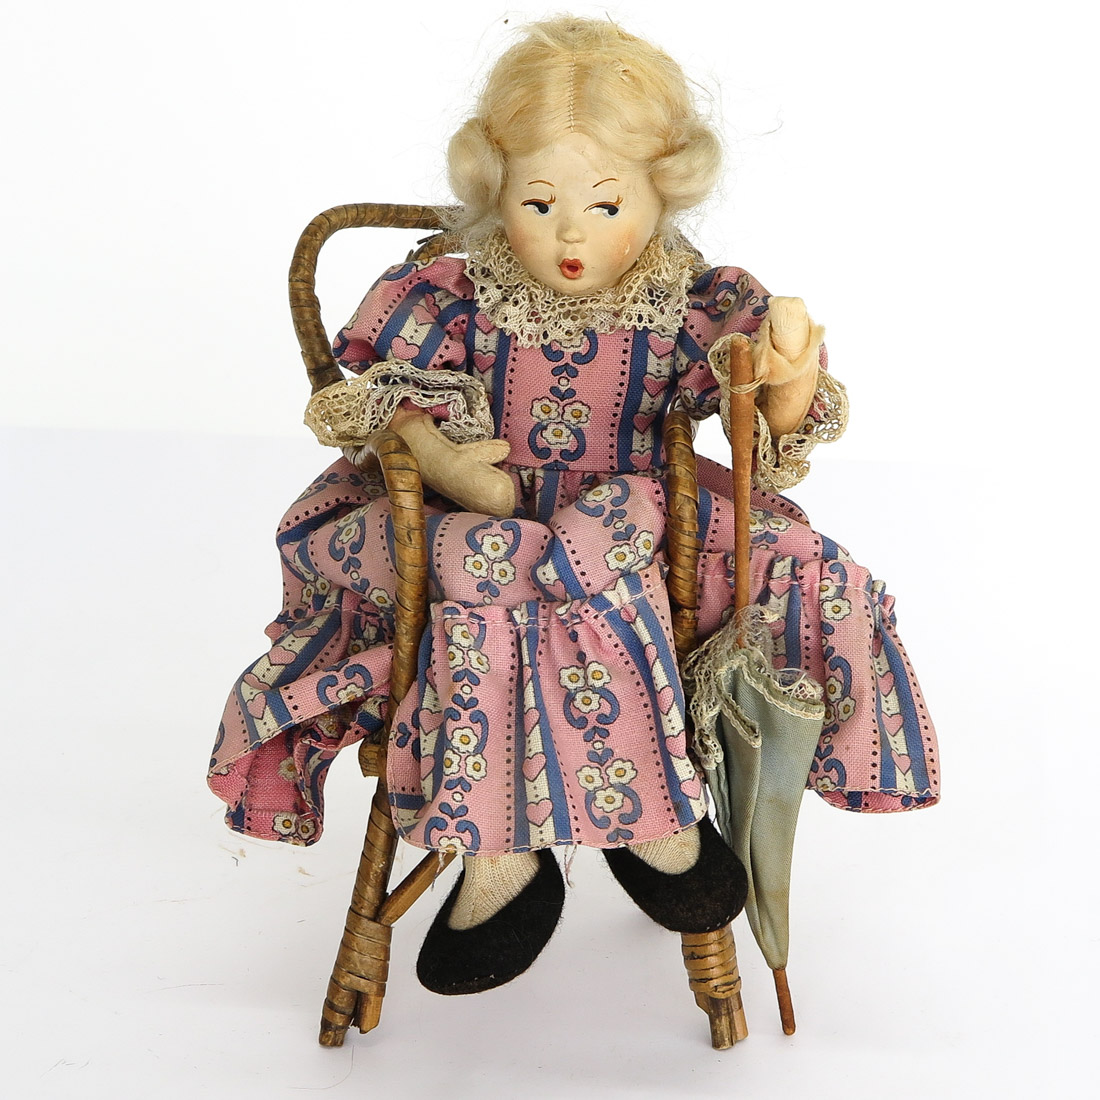 Vintage Cloth Doll in Chair